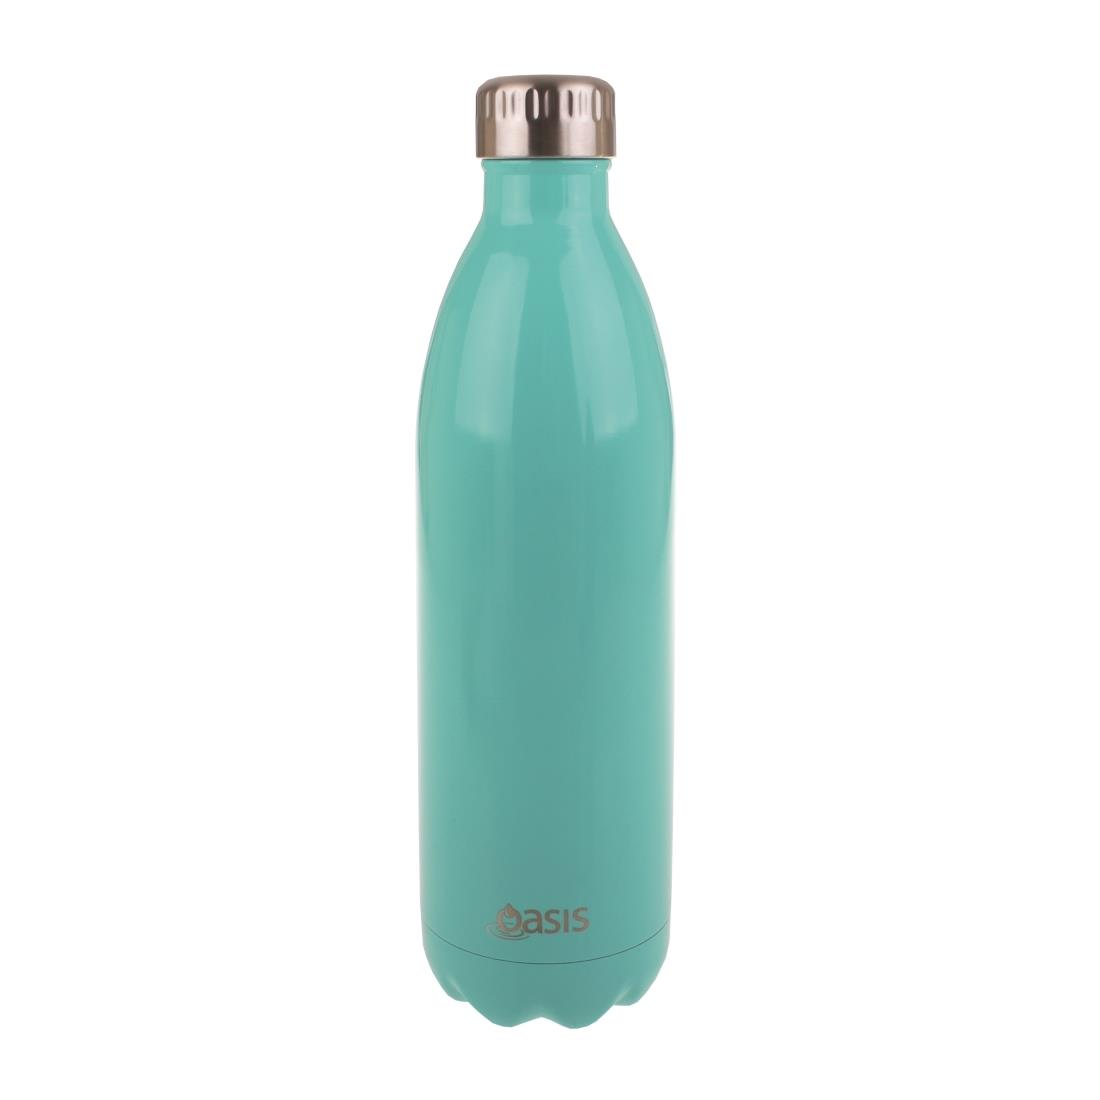 Oasis Insulated Stainless Steel Water Bottle - Spearmint (1L) - D.Line